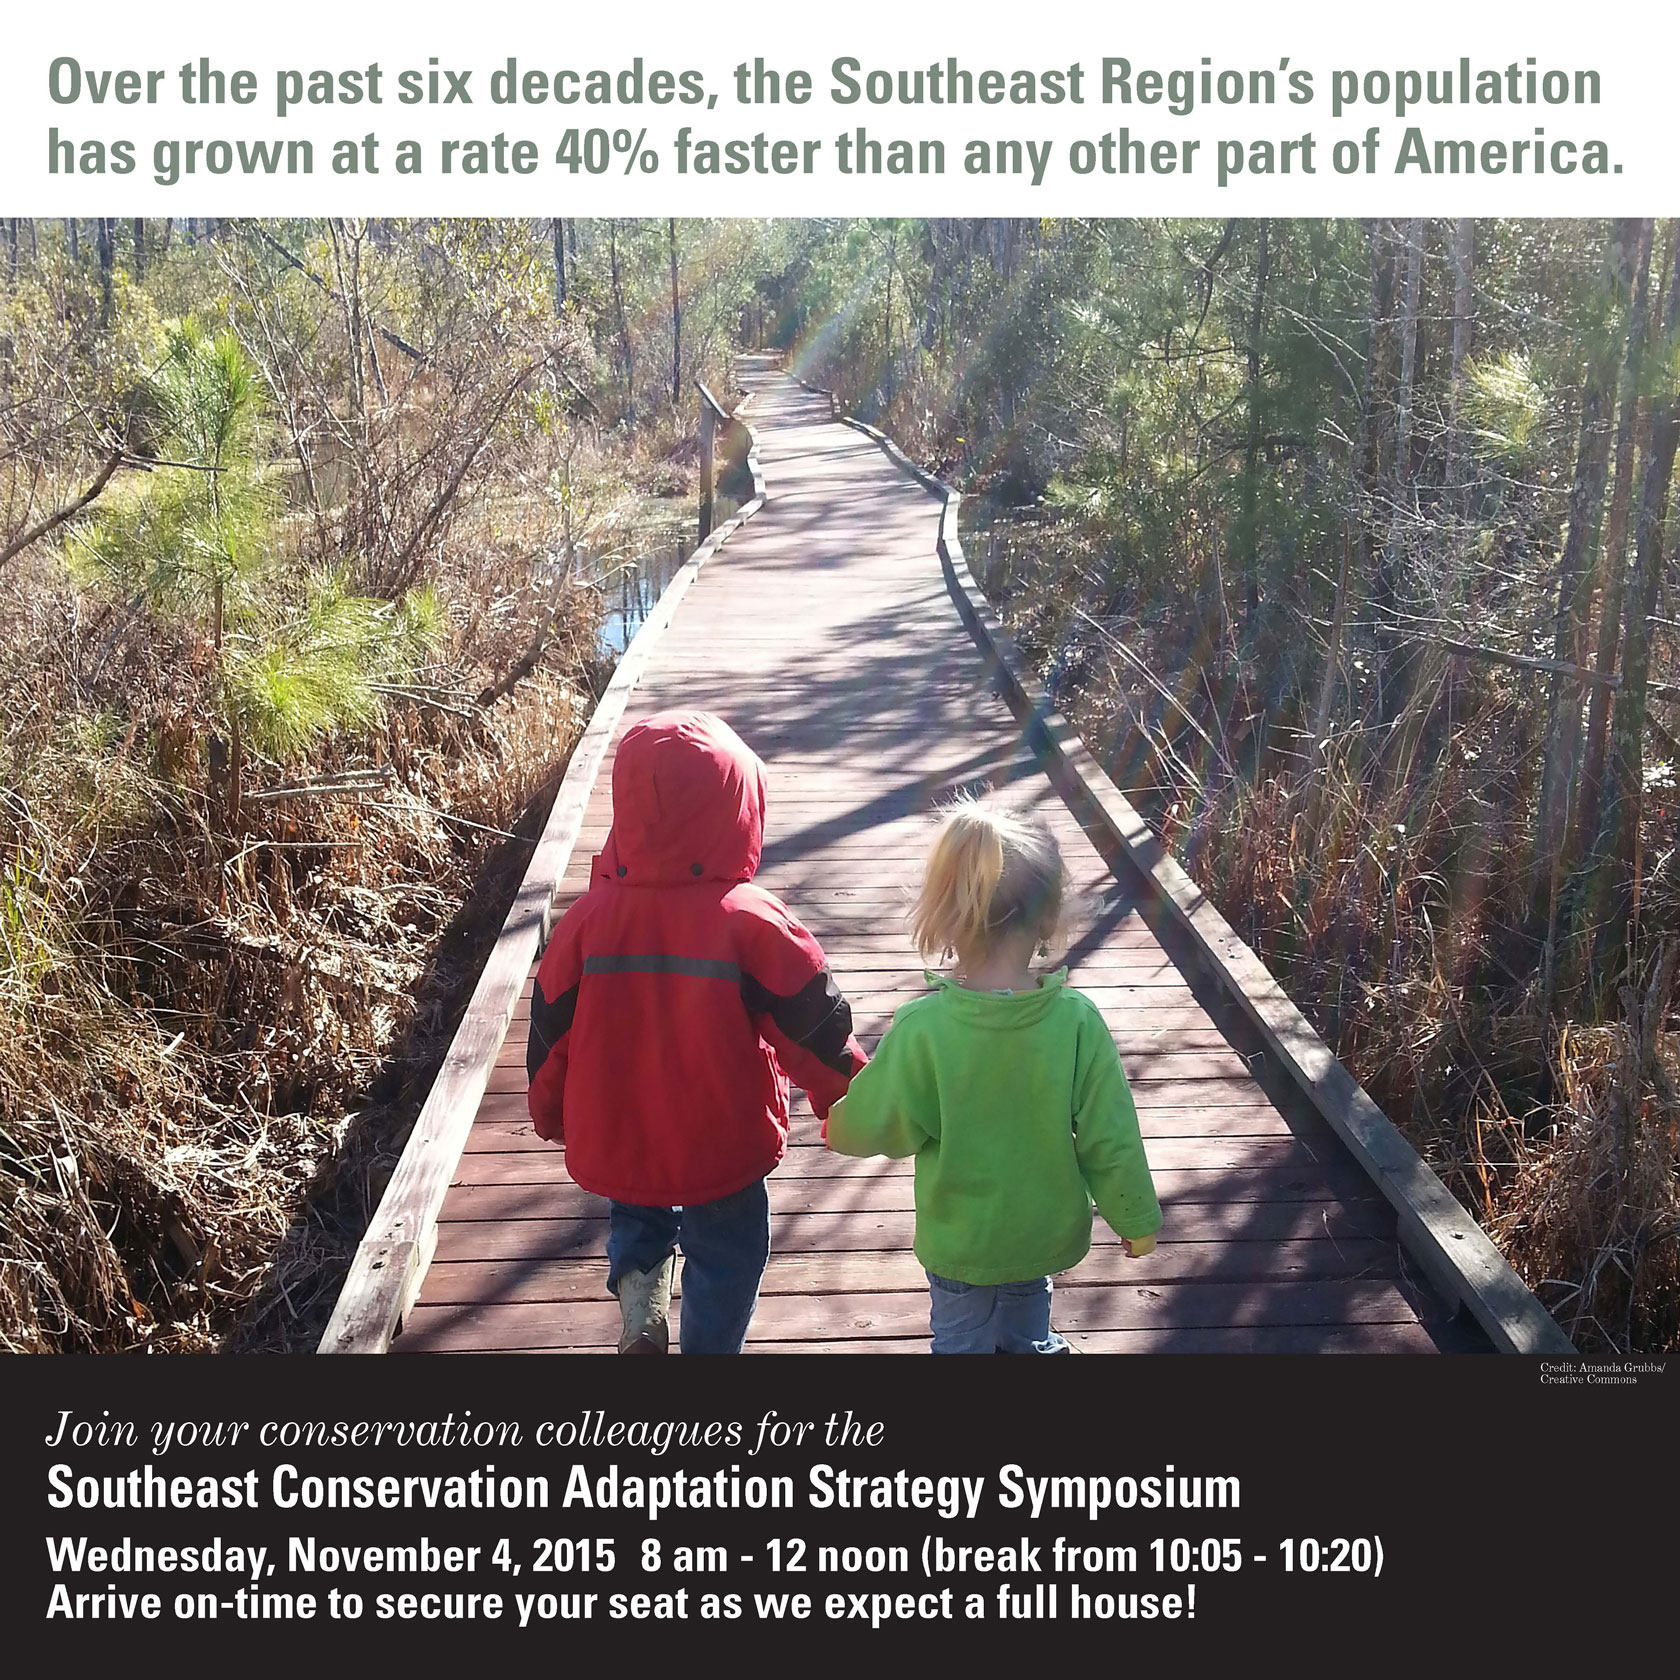 Poster advertising the SECAS symposium at the 2015 SEAFWA annual meeting, picturing two kids walking hand in hand down a boardwalk through a wooded area. It says 'Join your conservation colleagues for the Southeast Conservation Adaptation Strategy Symposium; Wednesday, November 4, 2015, 8 am - 12 noon (break from 10:05 - 10:20); Arrive on time to secure your seat as we expect a full house!'